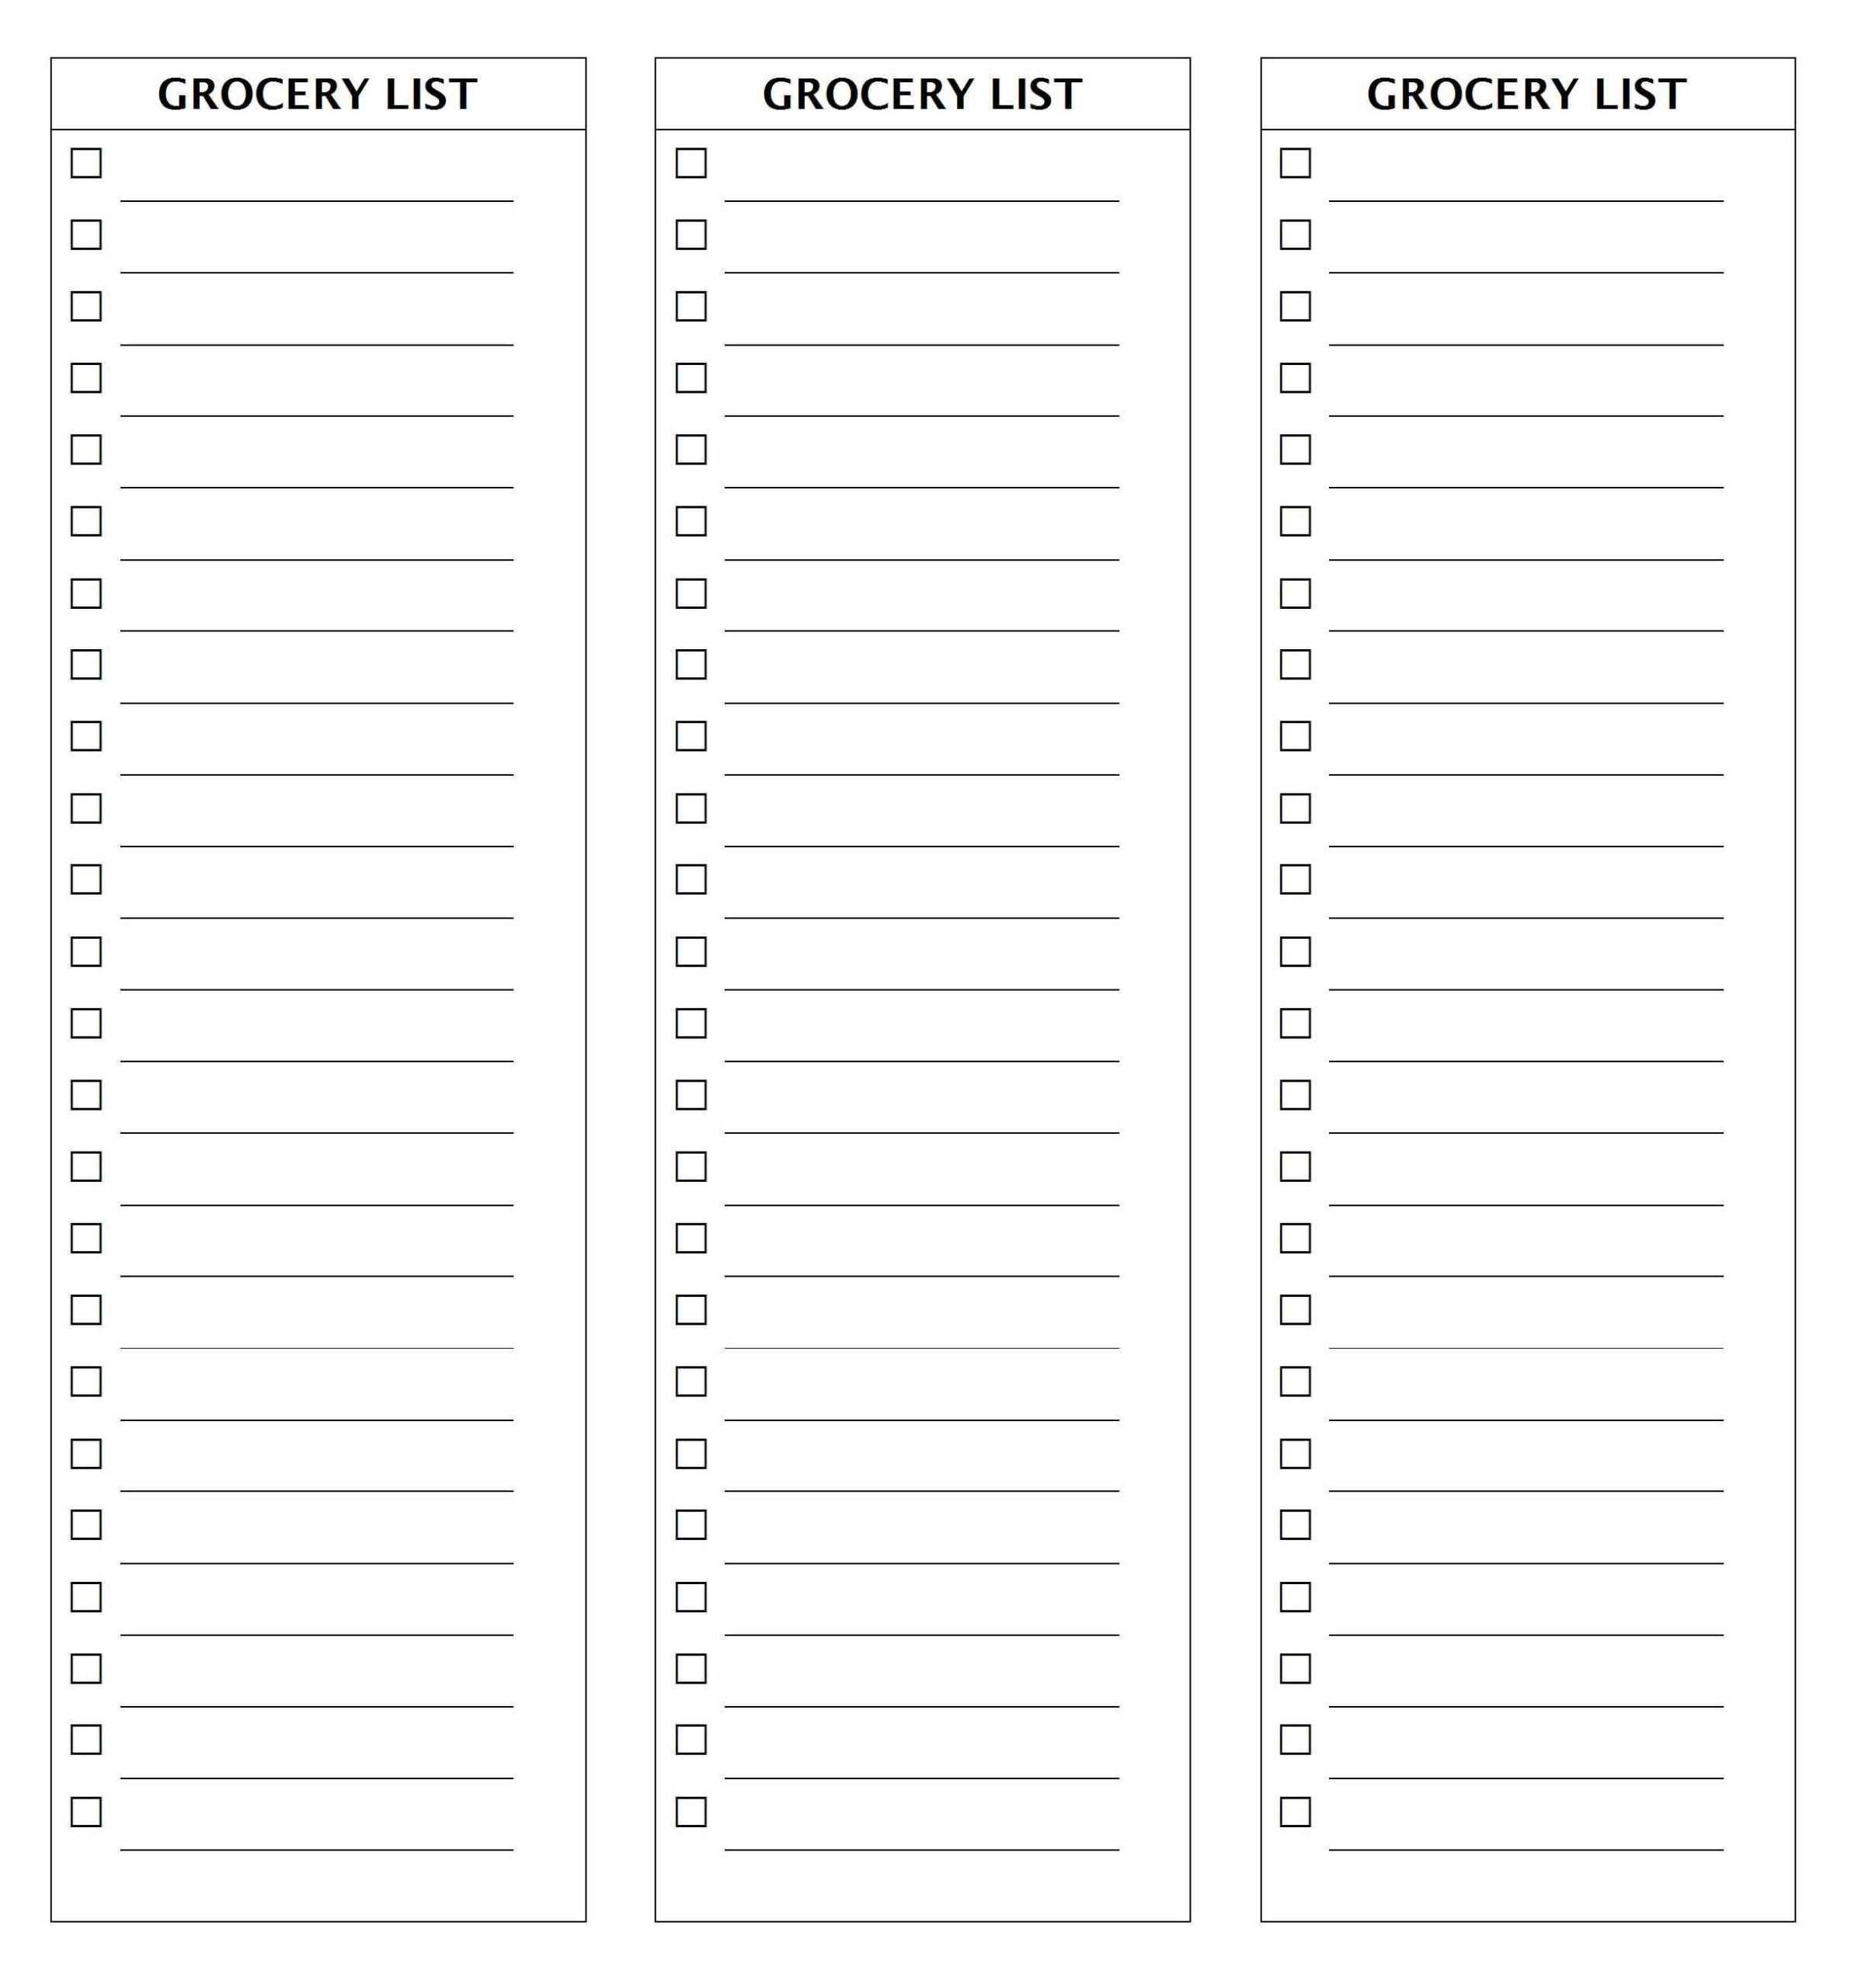 Blank Grocery List Template | Simple Grocery List, Printable In Blank Grocery Shopping List Template